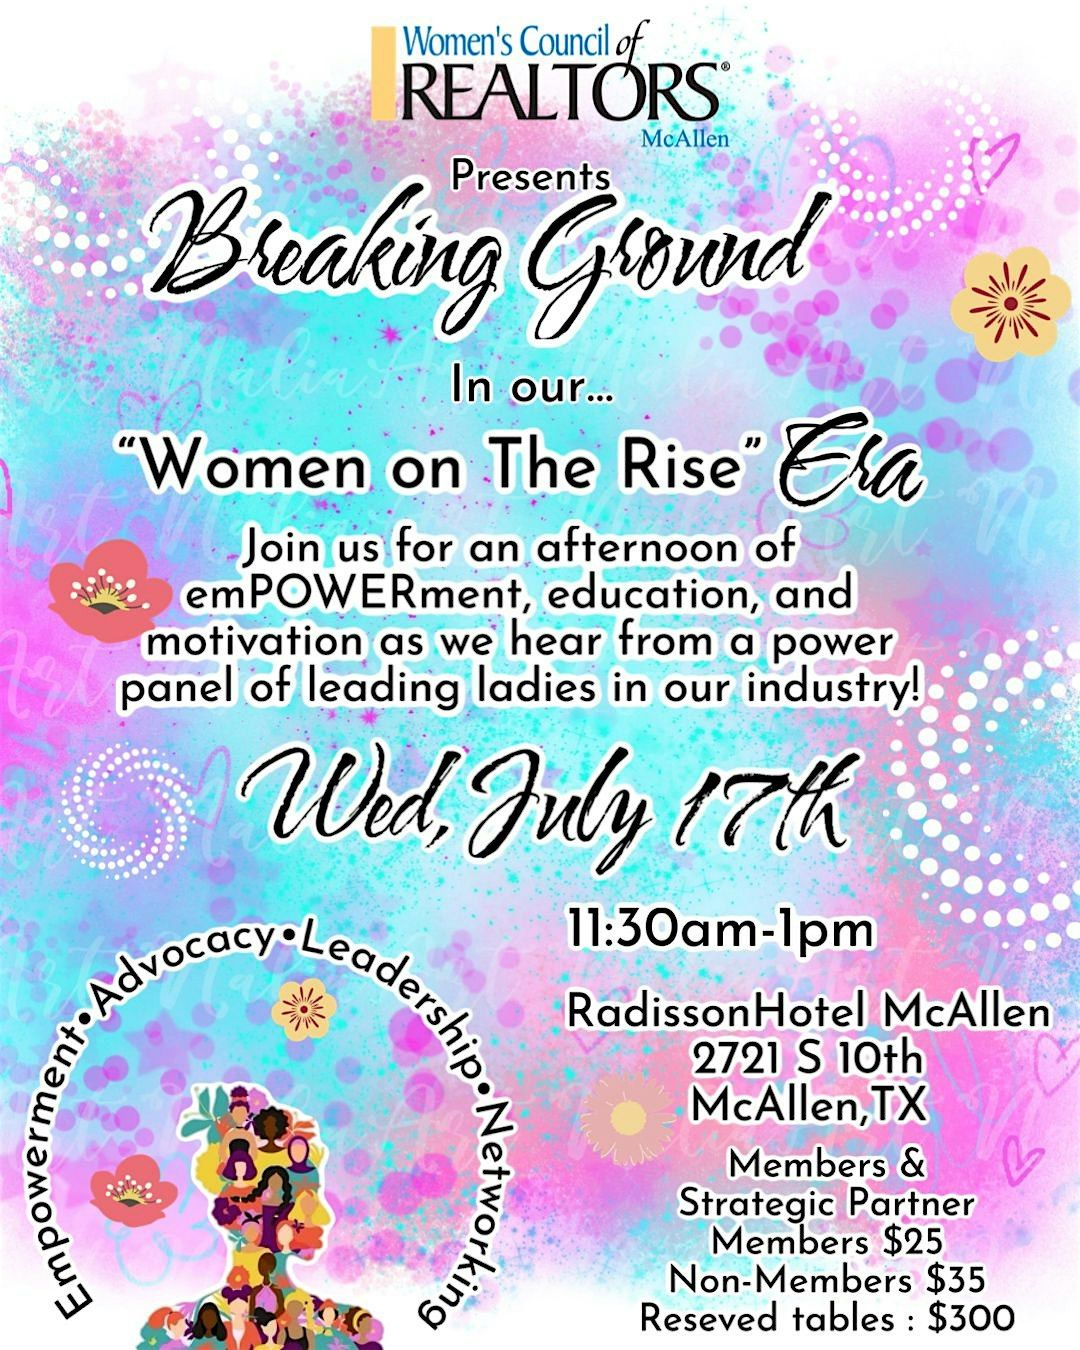 In Our Breaking Ground "Women On The Rise" Era